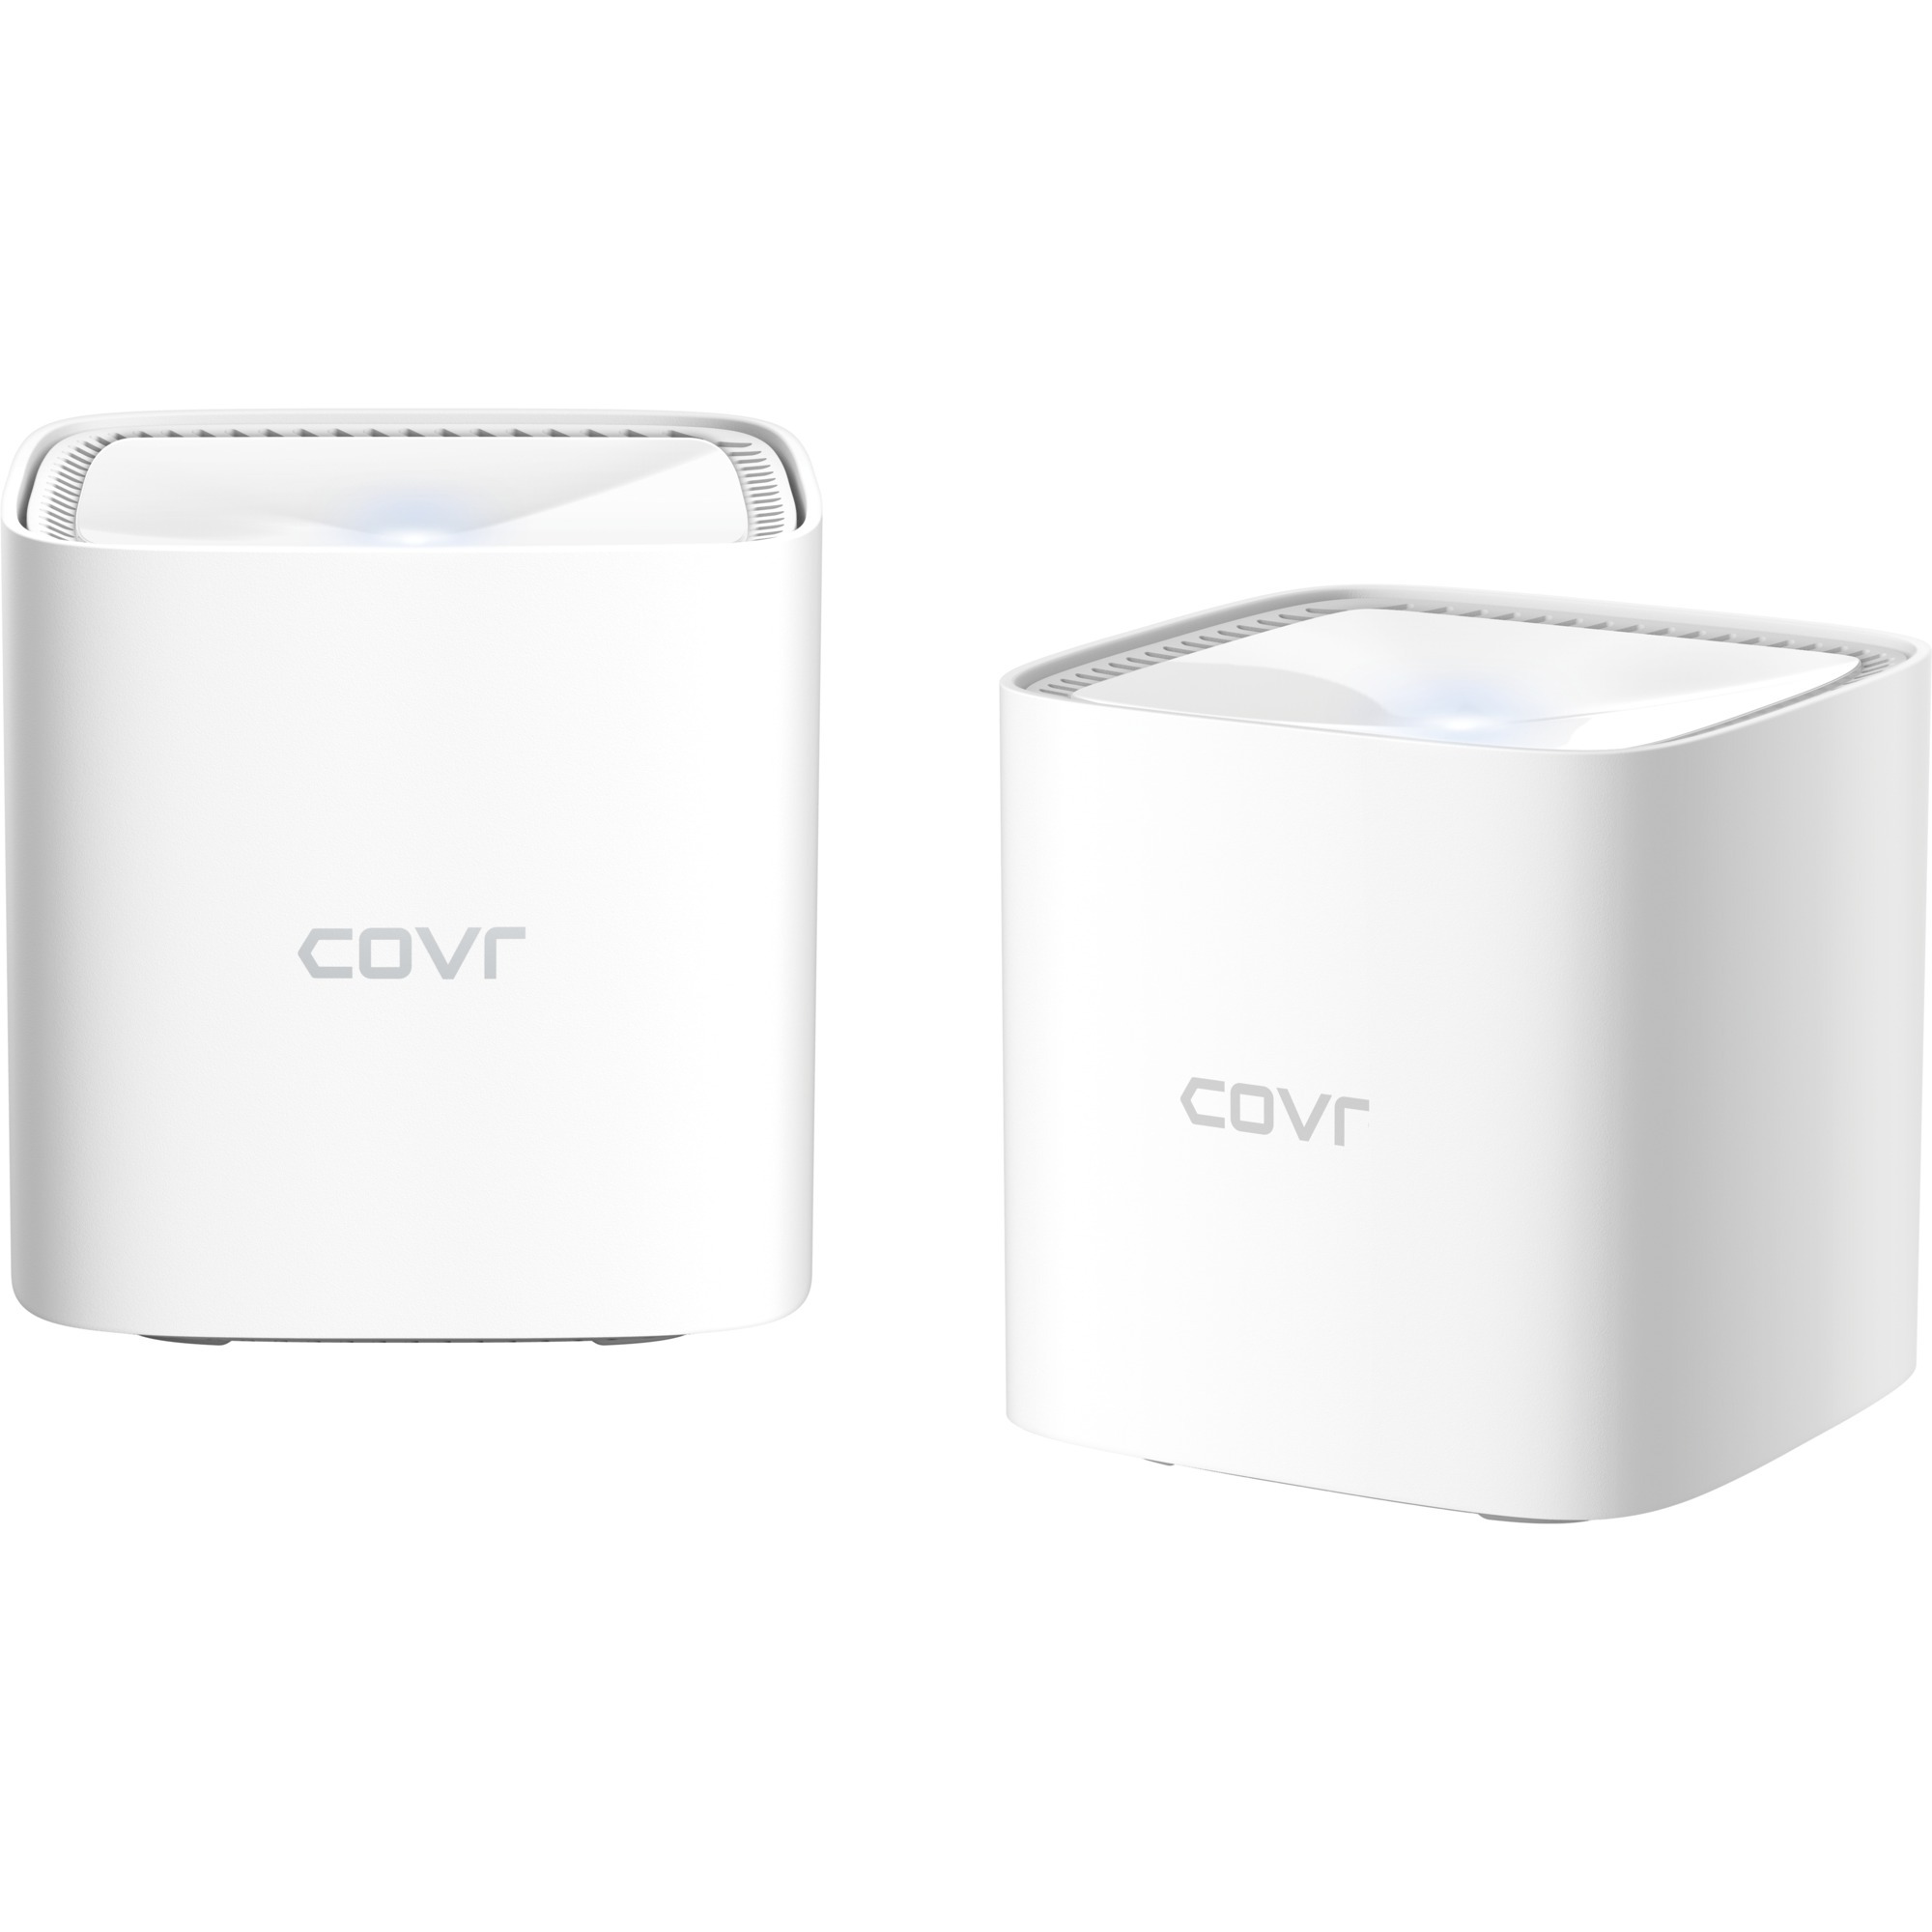 Image of Alternate - COVR-1102 Dualband Whole Home Mesh Wi-Fi, Access Point online einkaufen bei Alternate